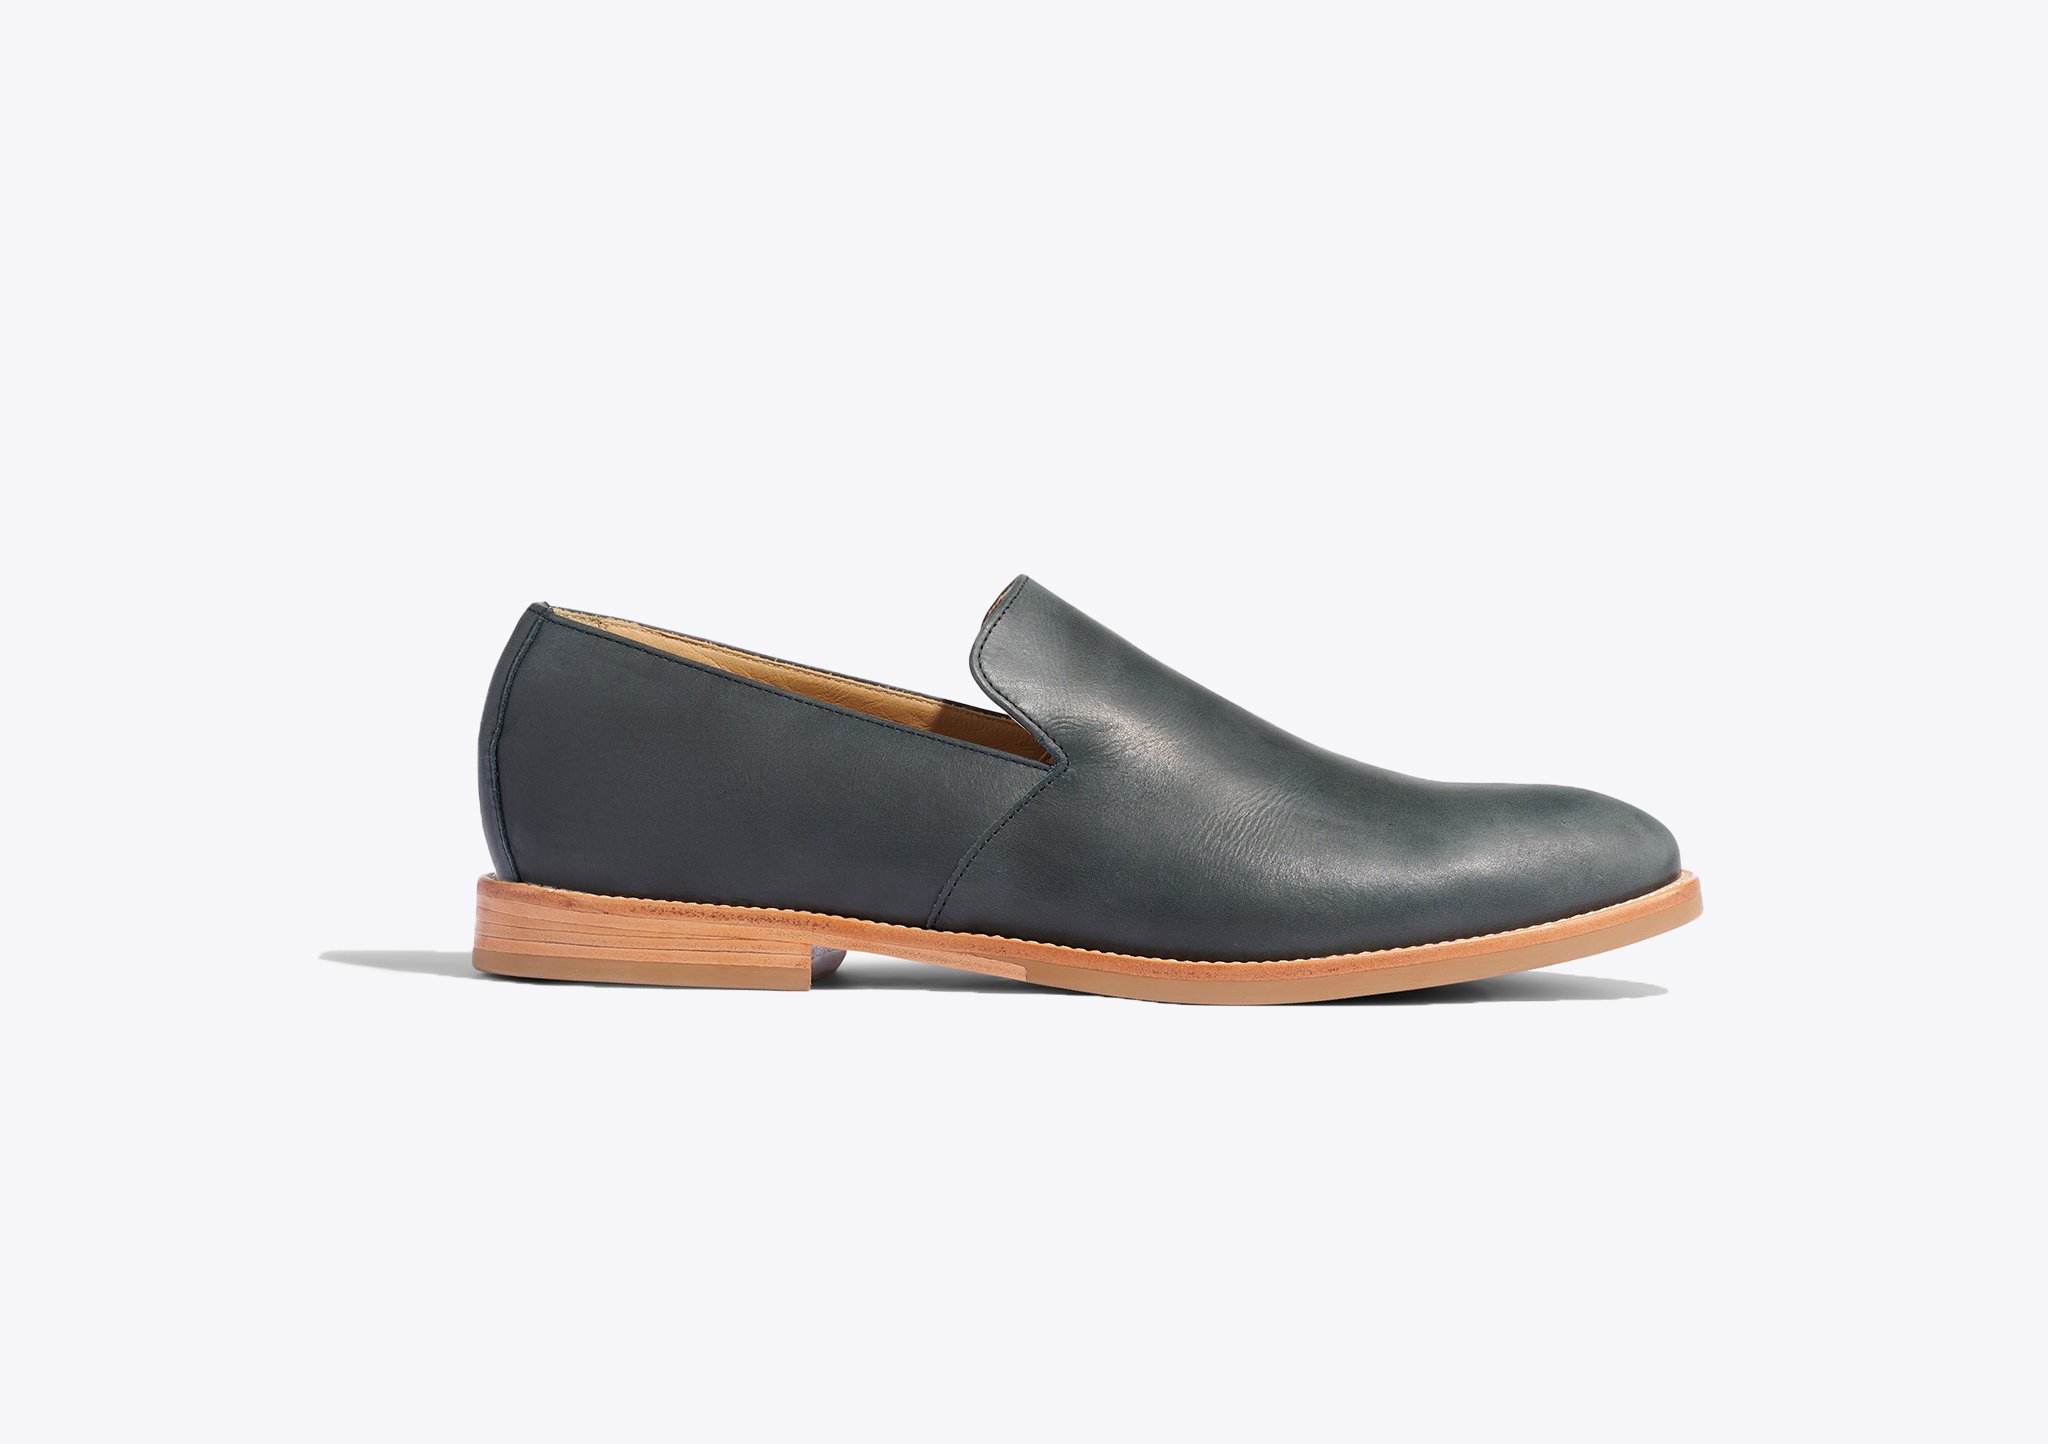 Nisolo Rio Slip-On Loafer Black - Every Nisolo product is built on the foundation of comfort, function, and design. 